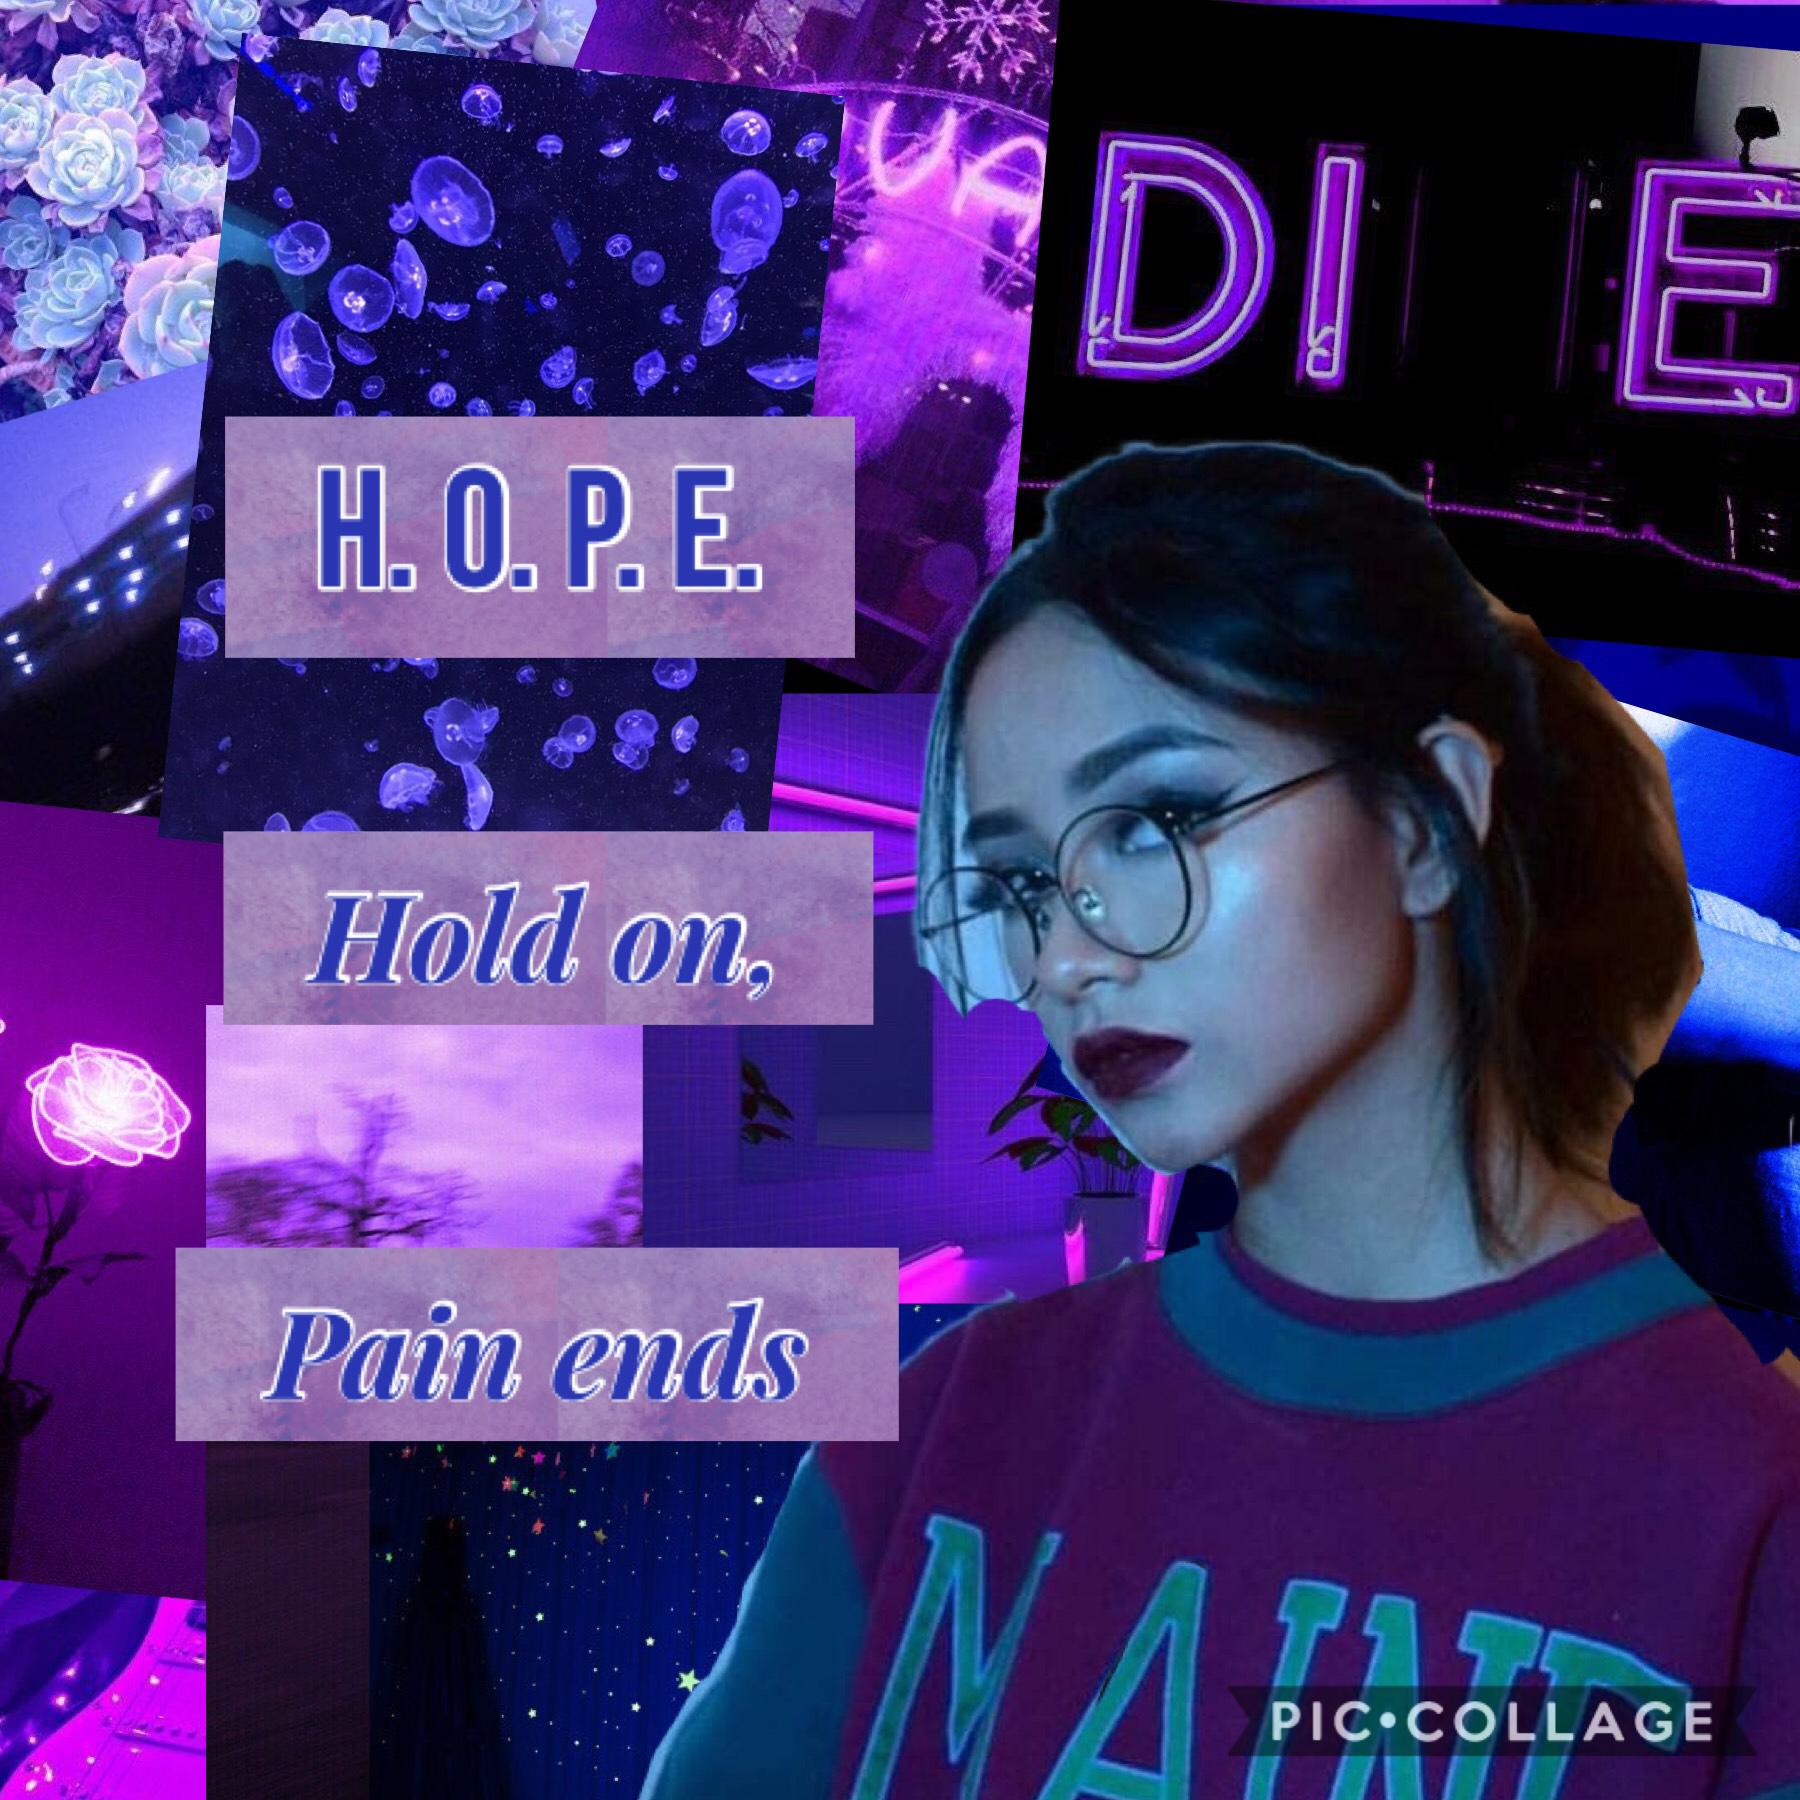 H. O. P. E.
Hold on, pain ends
💙💜